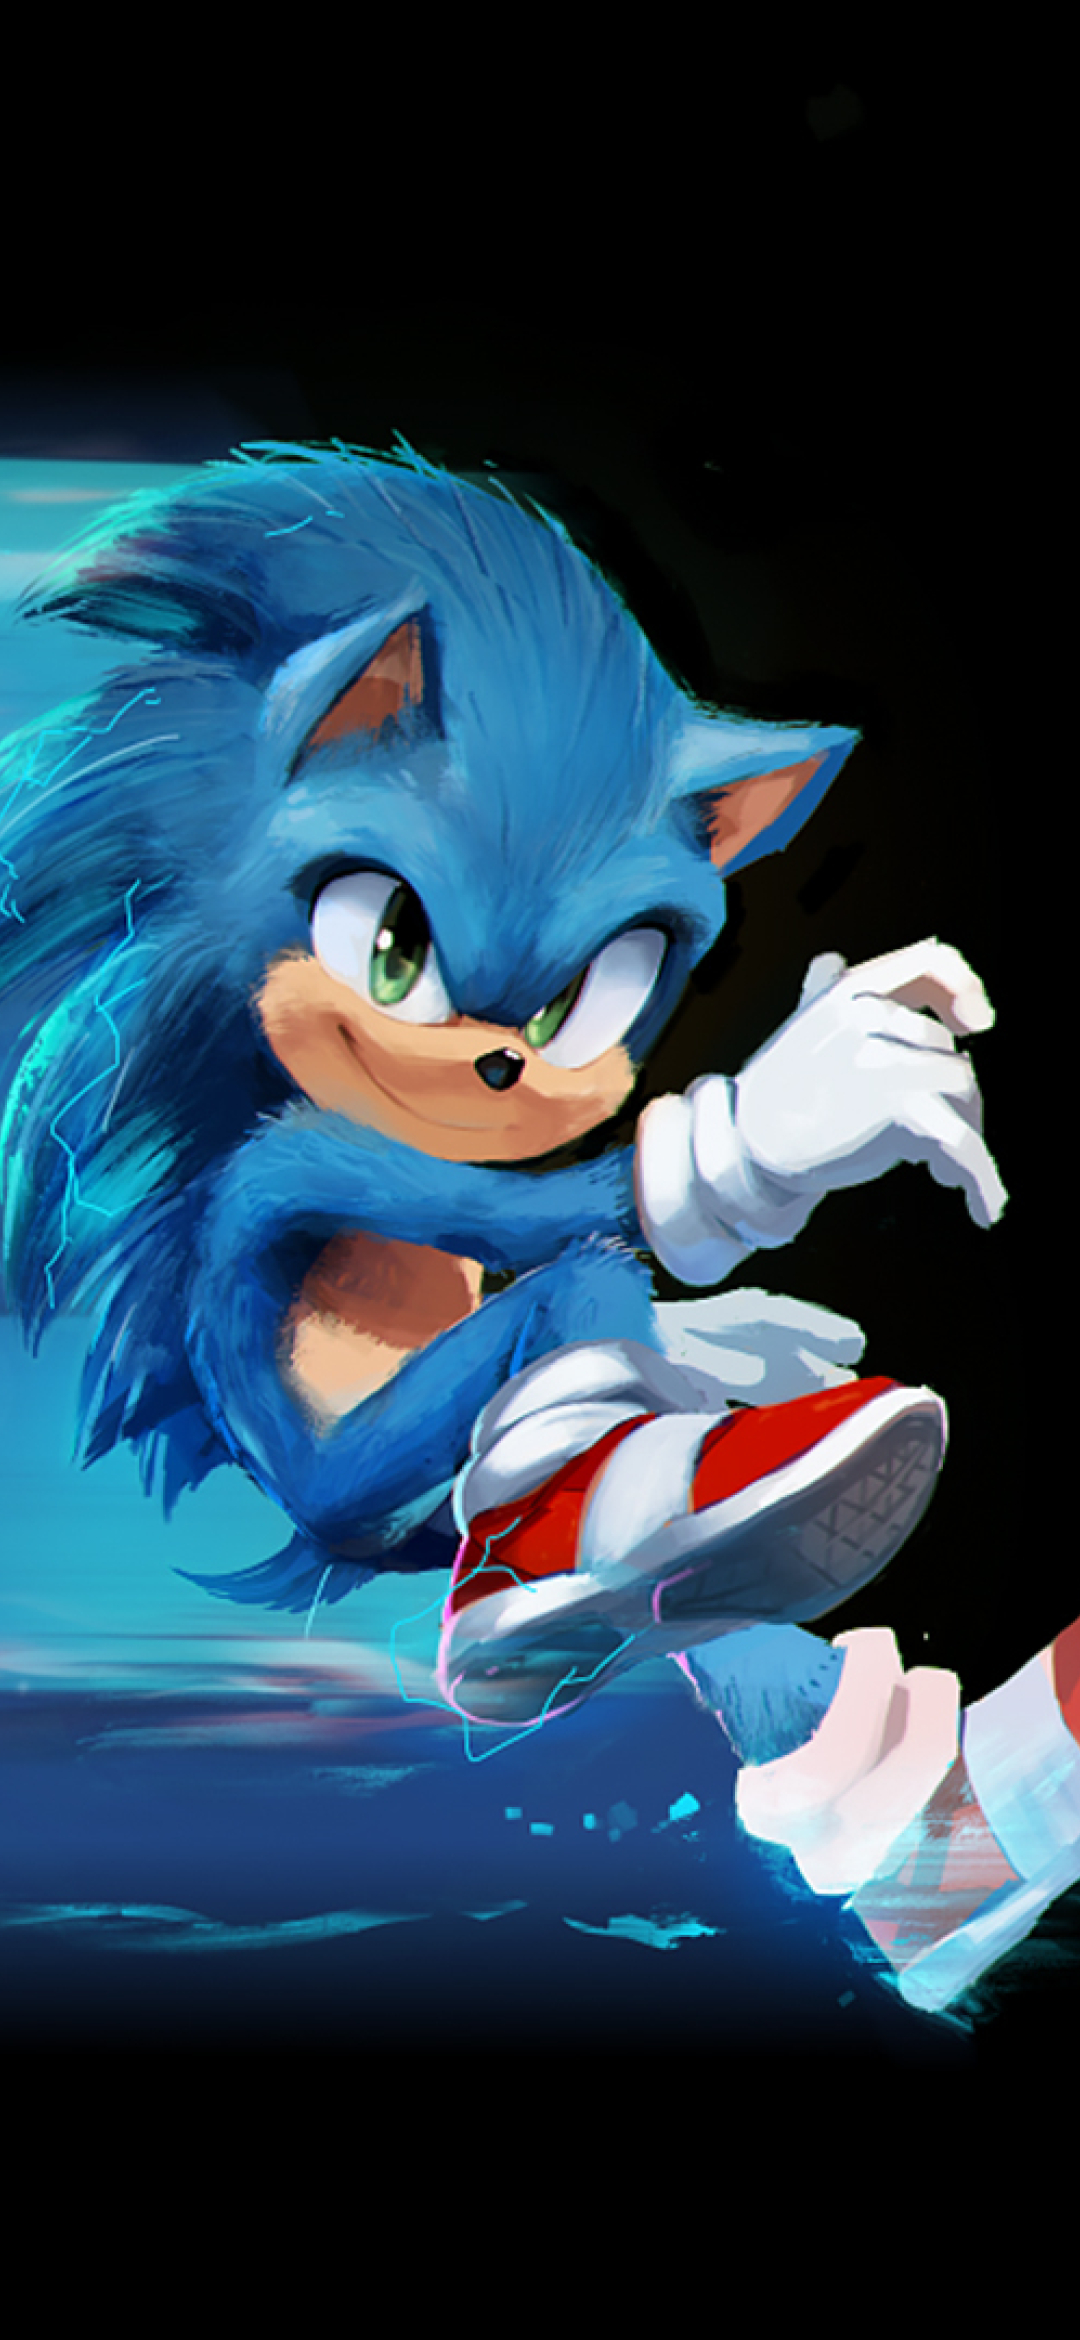 1080x2340 Sonic The Hedgehog Artwork 1080x2340 Resolution Wallpaper Hd Movies 4k Wallpapers Images Photos And Background